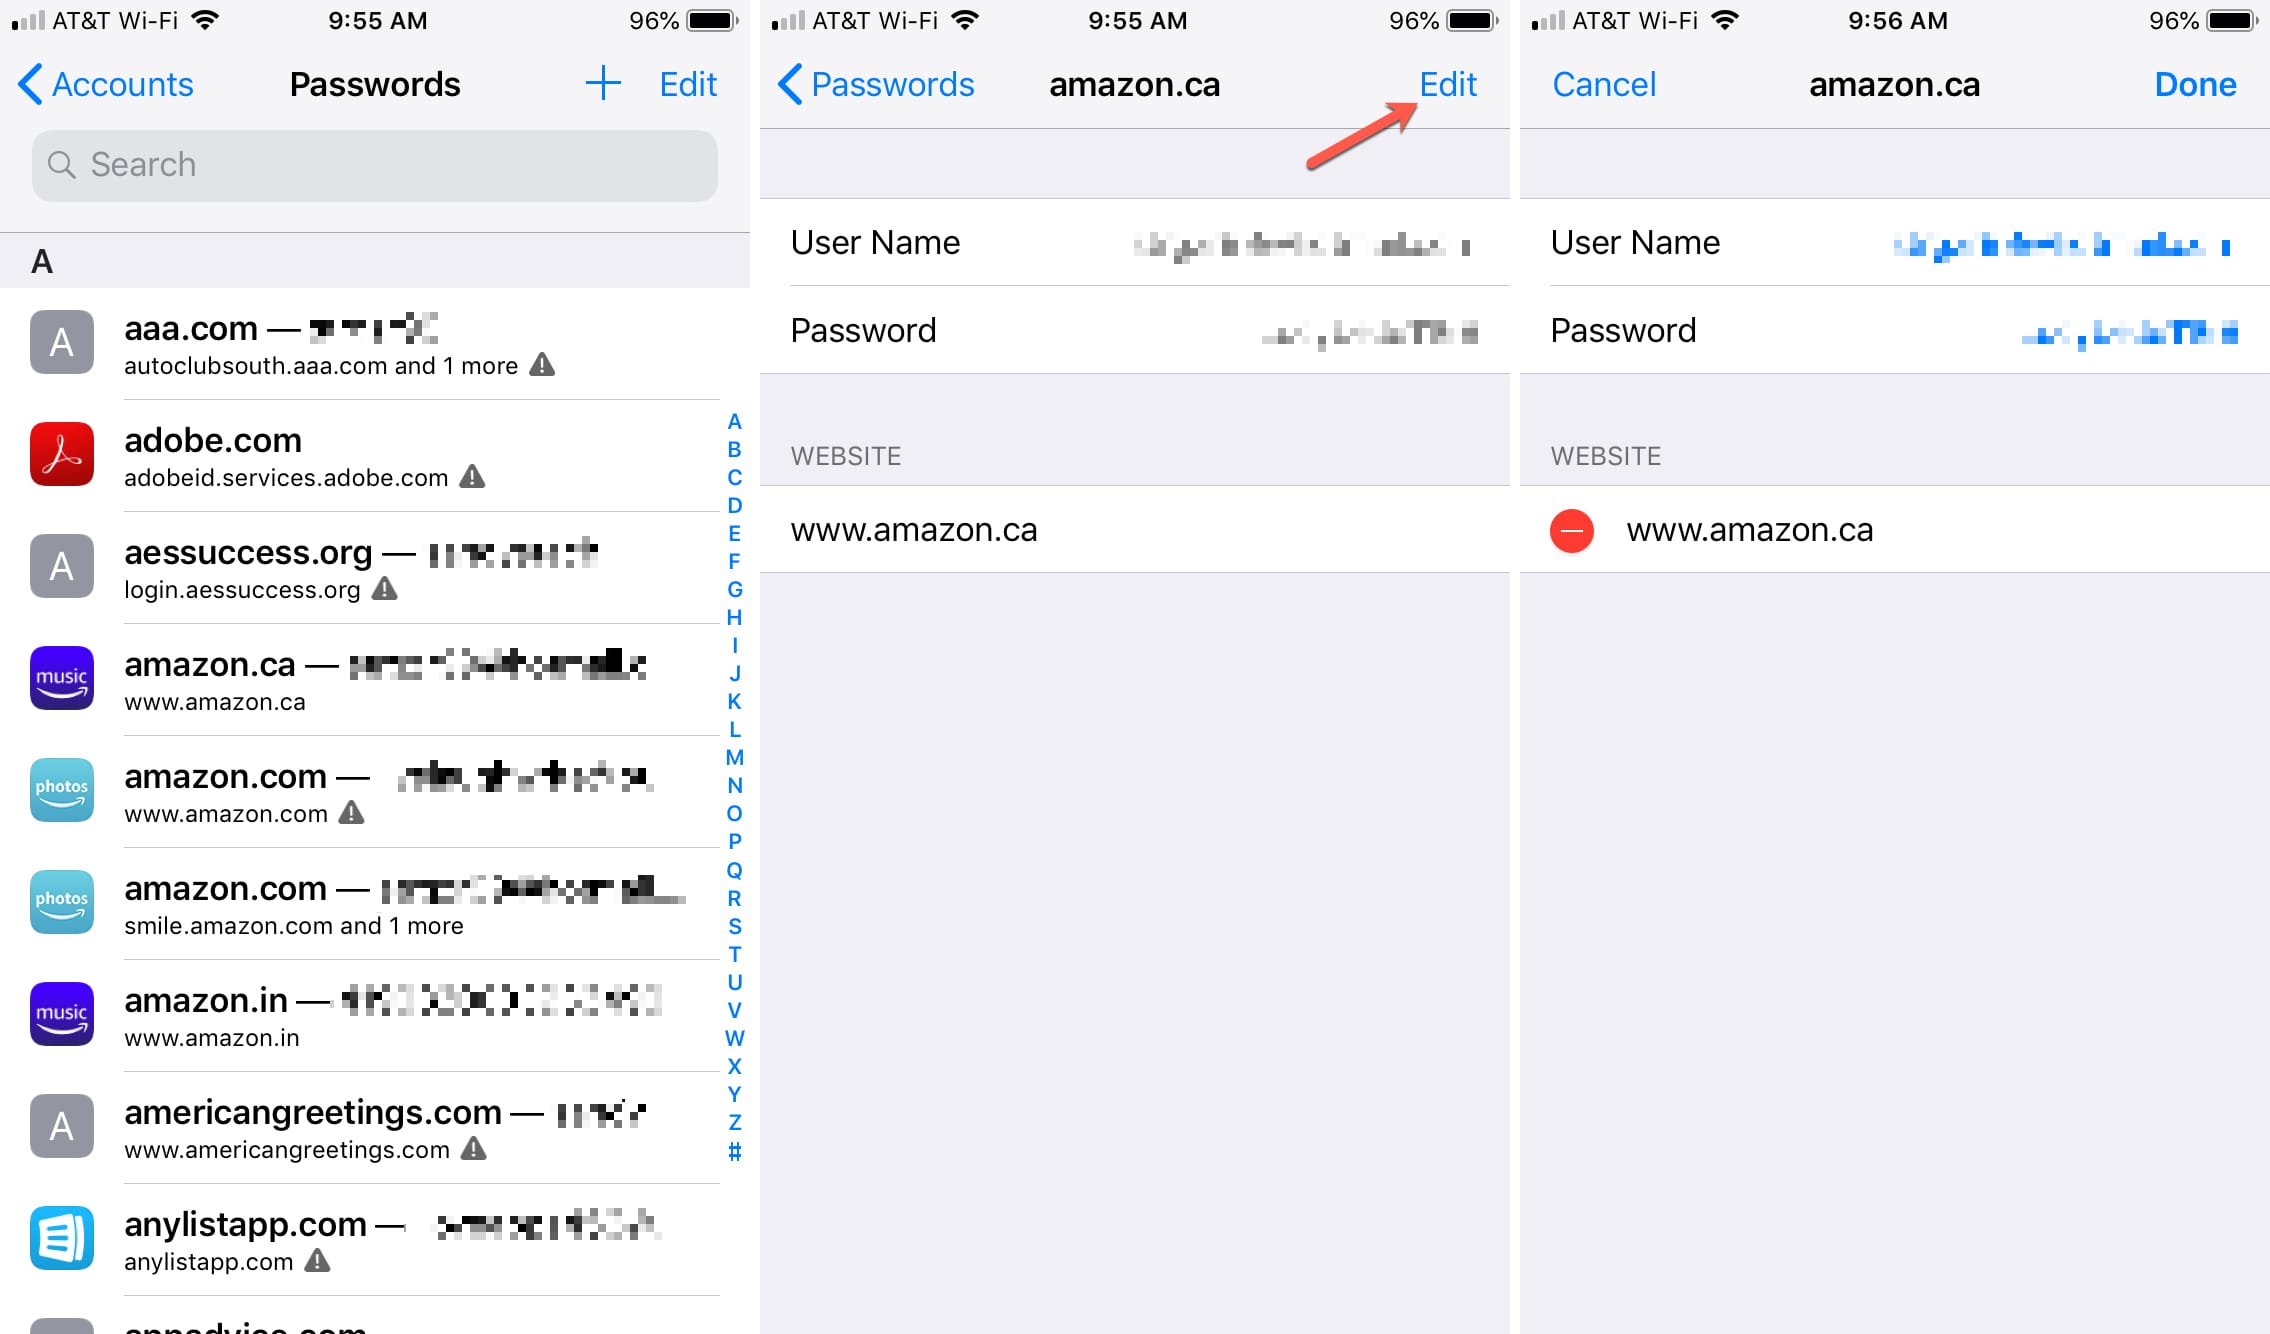 View Keychain Passwords and Edit on iPhone